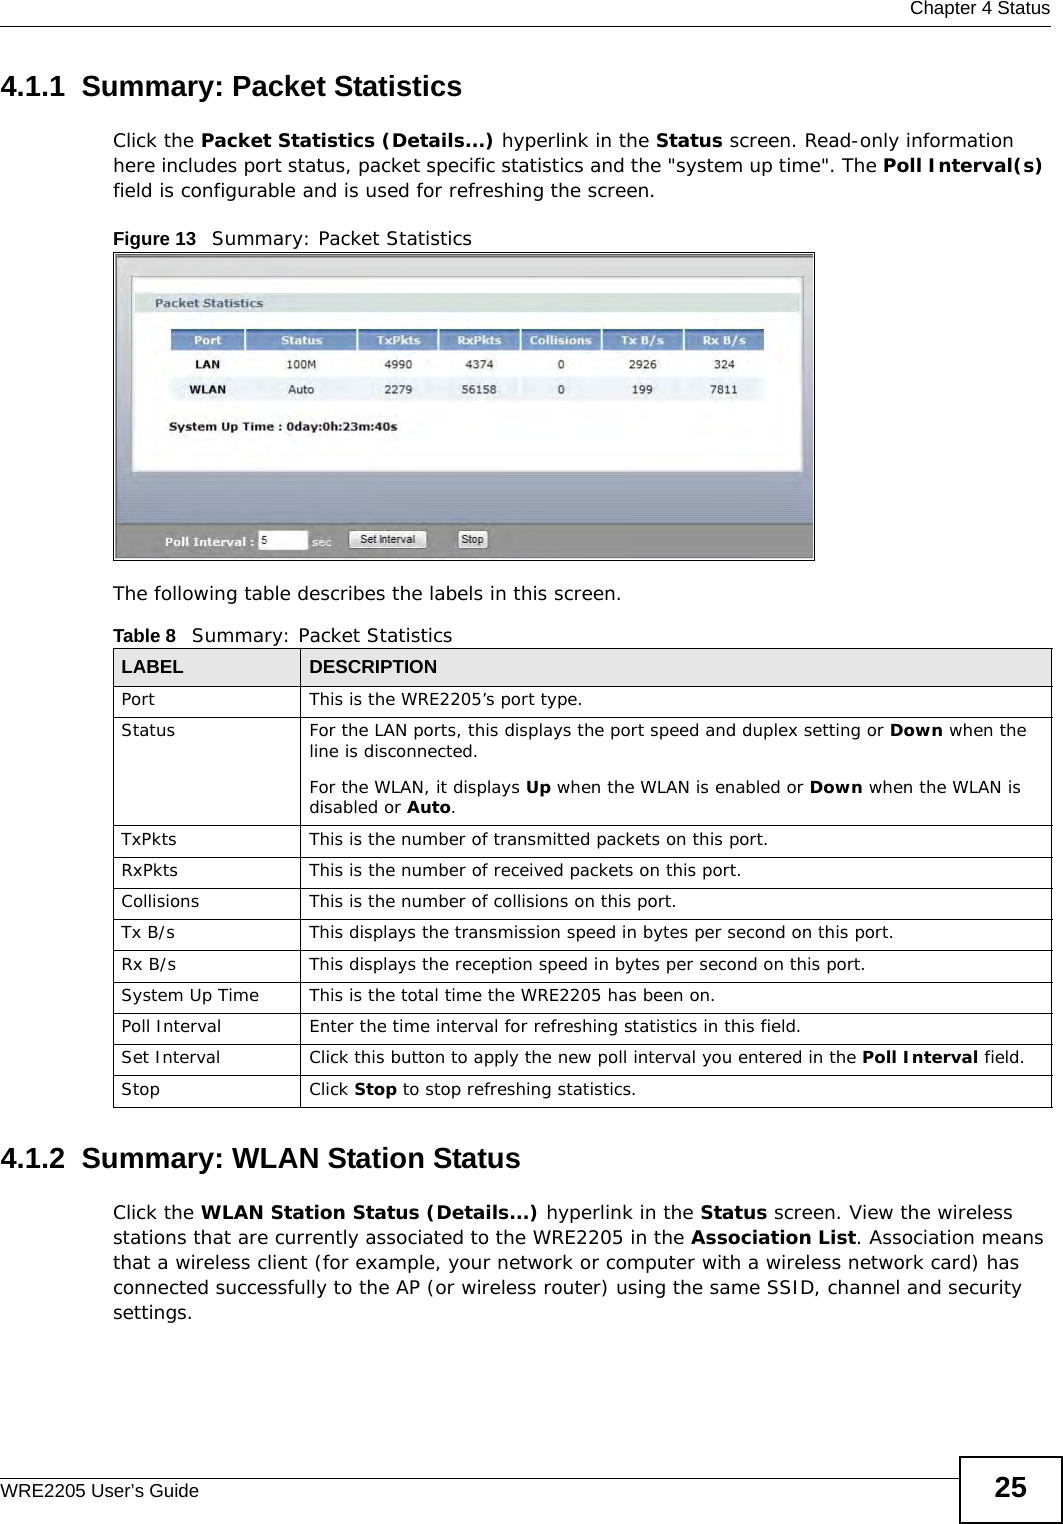  Chapter 4 StatusWRE2205 User’s Guide 254.1.1  Summary: Packet Statistics Click the Packet Statistics (Details...) hyperlink in the Status screen. Read-only information here includes port status, packet specific statistics and the &quot;system up time&quot;. The Poll Interval(s) field is configurable and is used for refreshing the screen.Figure 13   Summary: Packet Statistics The following table describes the labels in this screen.4.1.2  Summary: WLAN Station Status     Click the WLAN Station Status (Details...) hyperlink in the Status screen. View the wireless stations that are currently associated to the WRE2205 in the Association List. Association means that a wireless client (for example, your network or computer with a wireless network card) has connected successfully to the AP (or wireless router) using the same SSID, channel and security settings.Table 8   Summary: Packet StatisticsLABEL DESCRIPTIONPort This is the WRE2205’s port type.Status  For the LAN ports, this displays the port speed and duplex setting or Down when the line is disconnected.For the WLAN, it displays Up when the WLAN is enabled or Down when the WLAN is disabled or Auto.TxPkts  This is the number of transmitted packets on this port.RxPkts  This is the number of received packets on this port.Collisions  This is the number of collisions on this port.Tx B/s  This displays the transmission speed in bytes per second on this port.Rx B/s This displays the reception speed in bytes per second on this port.System Up Time This is the total time the WRE2205 has been on.Poll Interval Enter the time interval for refreshing statistics in this field.Set Interval Click this button to apply the new poll interval you entered in the Poll Interval field.Stop Click Stop to stop refreshing statistics.